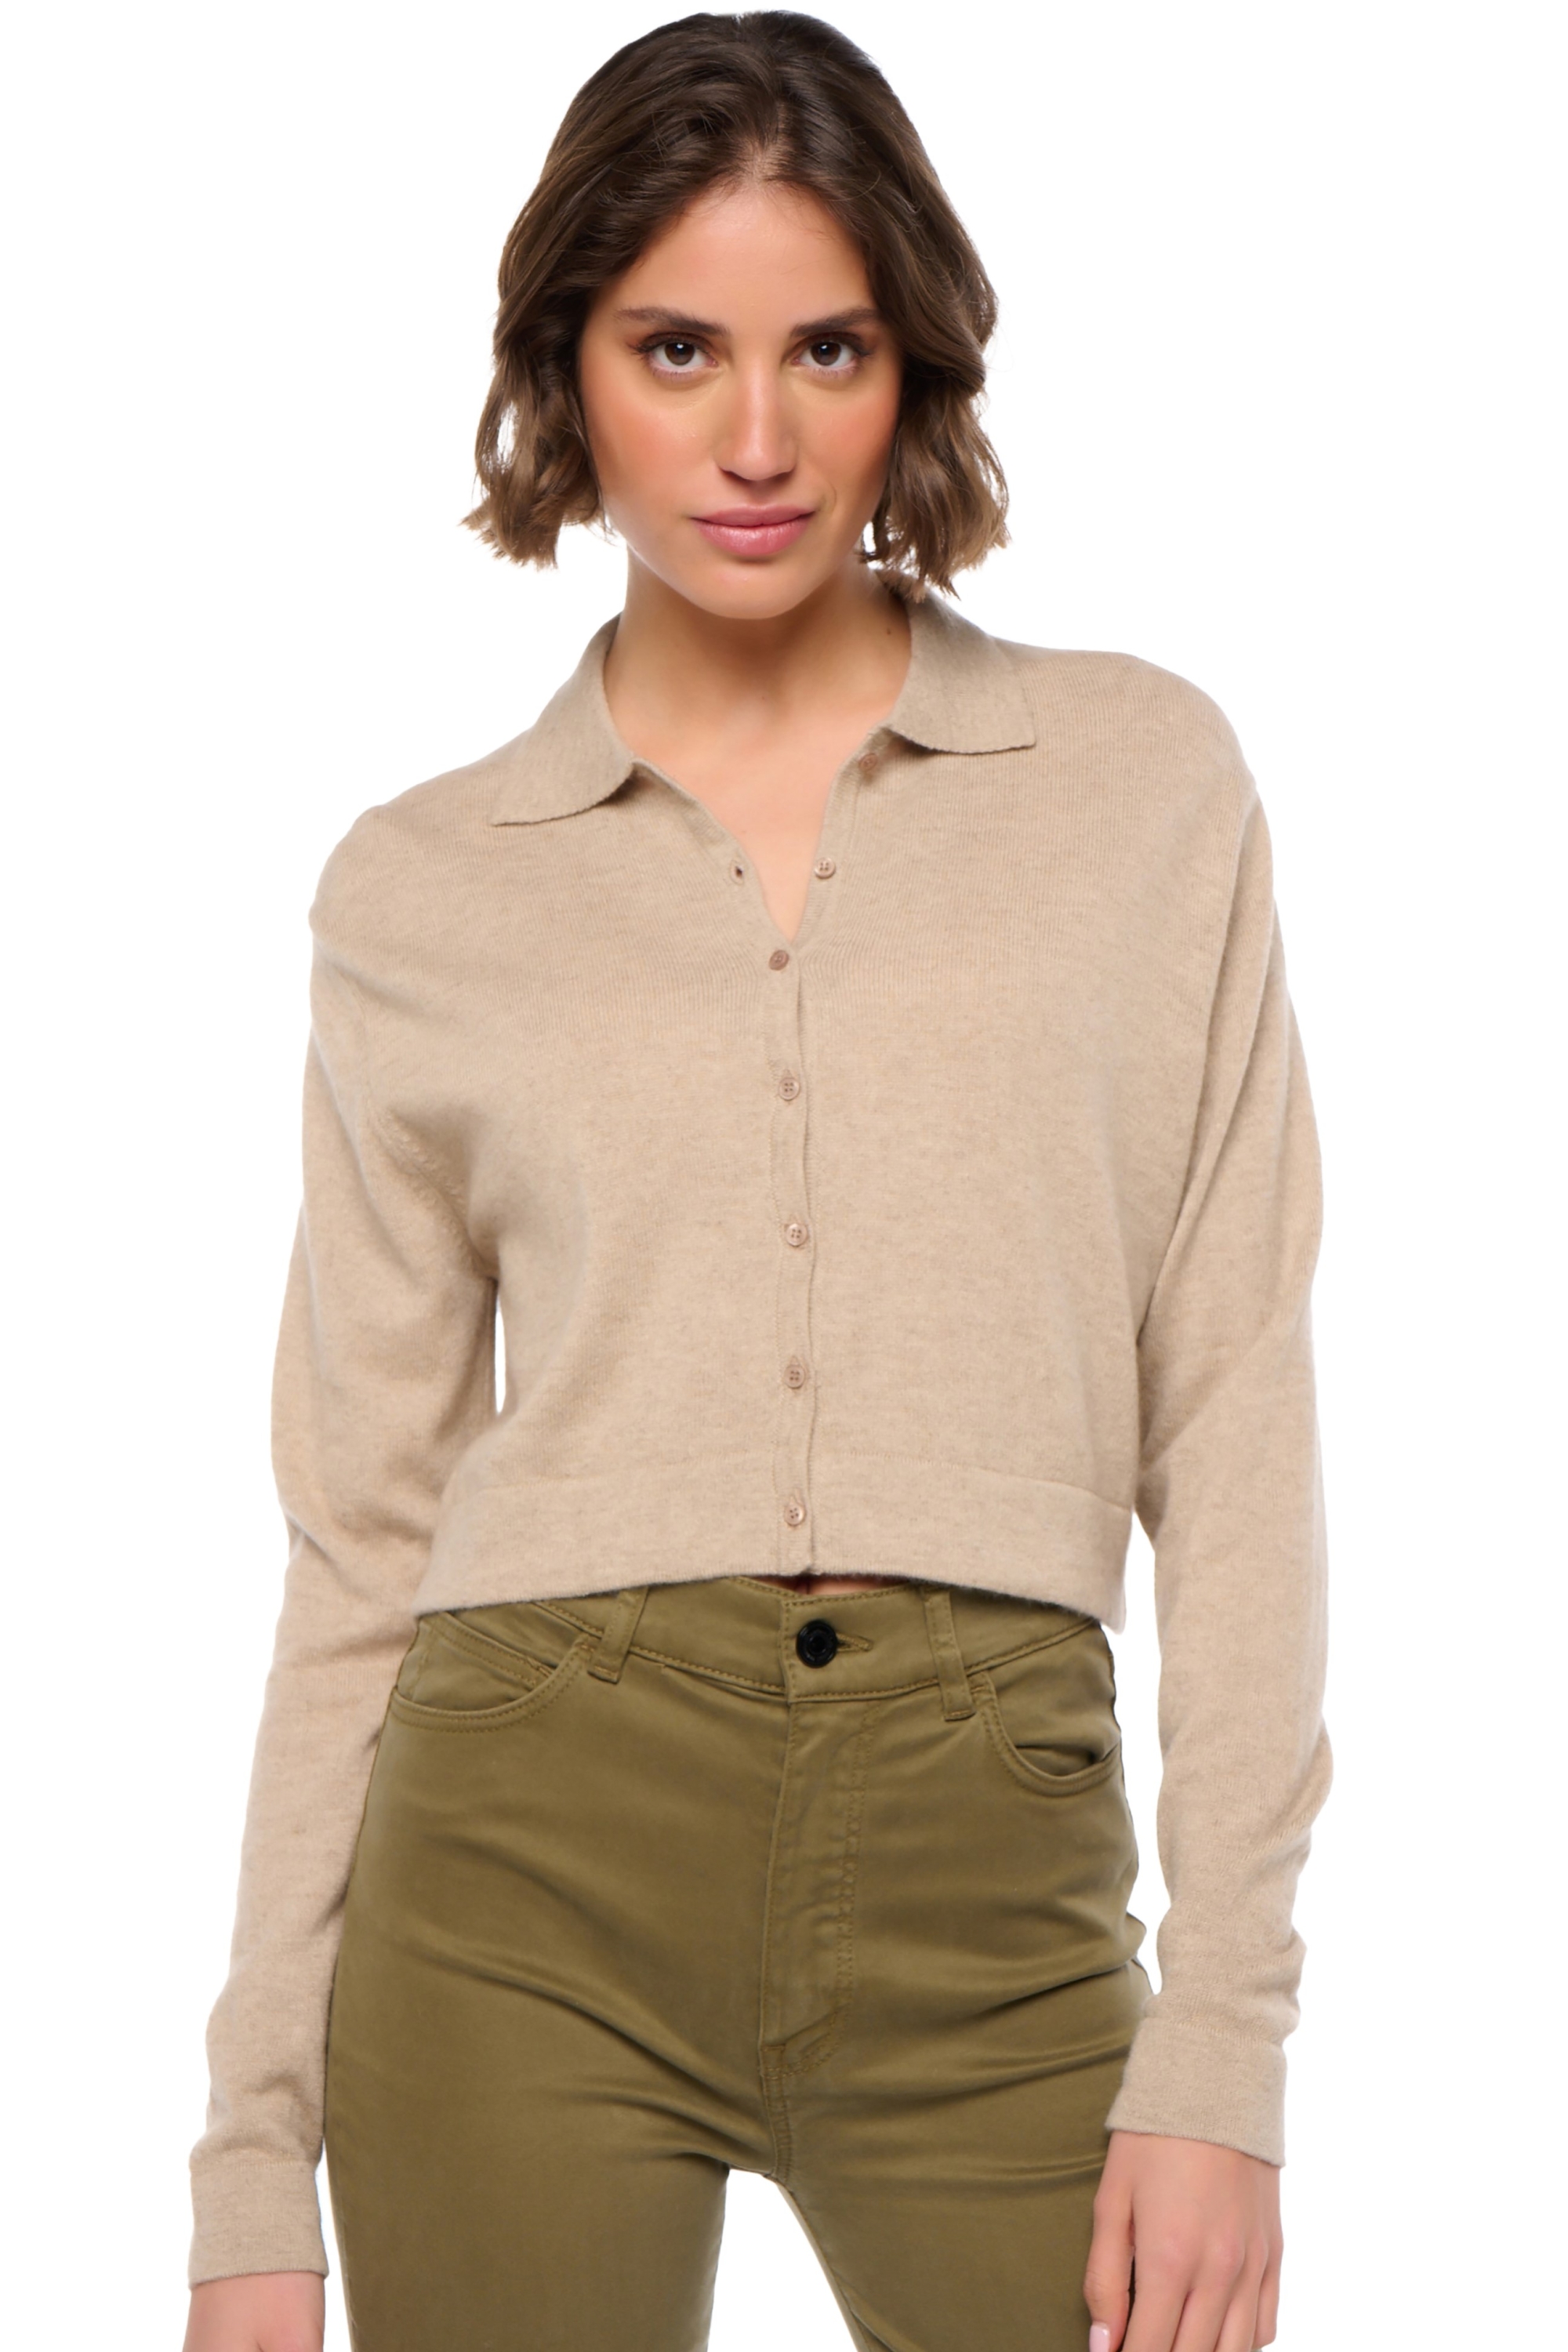 Cachemire pull femme soldes saya natural stone s